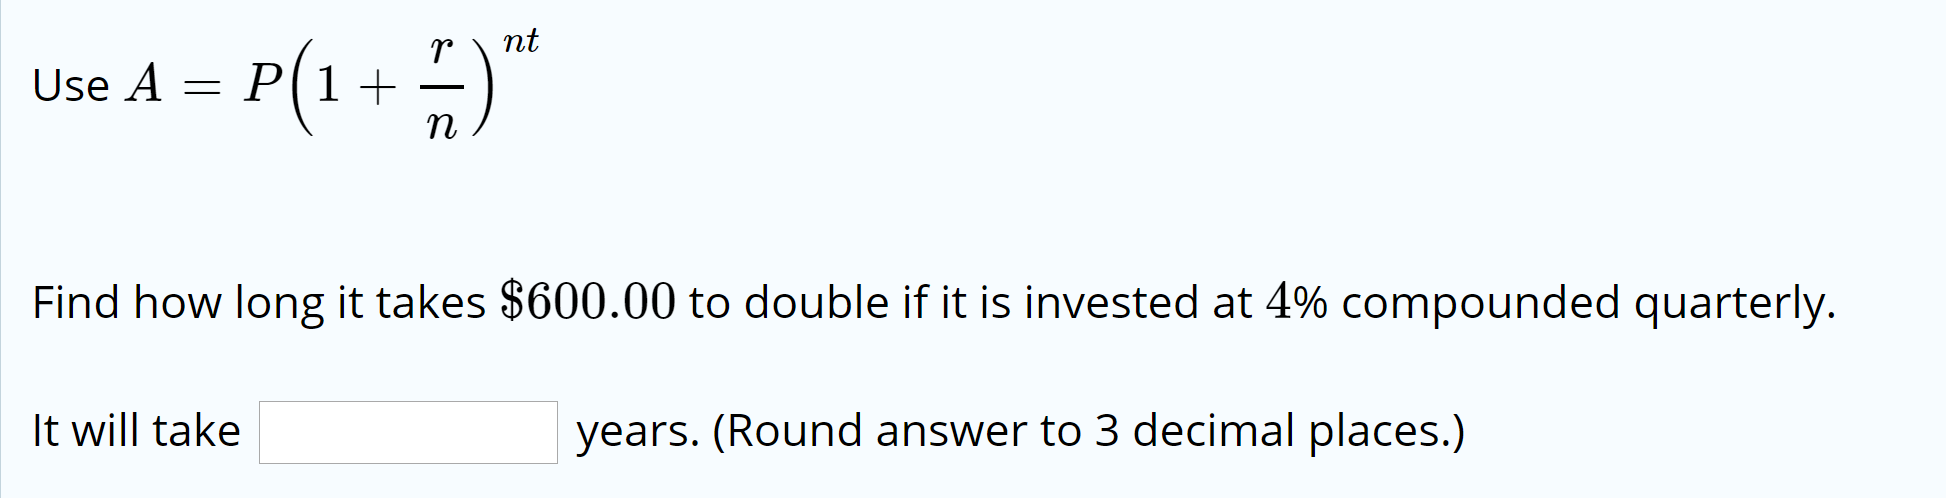 nt
Use A = P(1+
Find how long it takes $600.00 to double if it is invested at 4% compounded quarterly.
It will take
years. (Round answer to 3 decimal places.)
